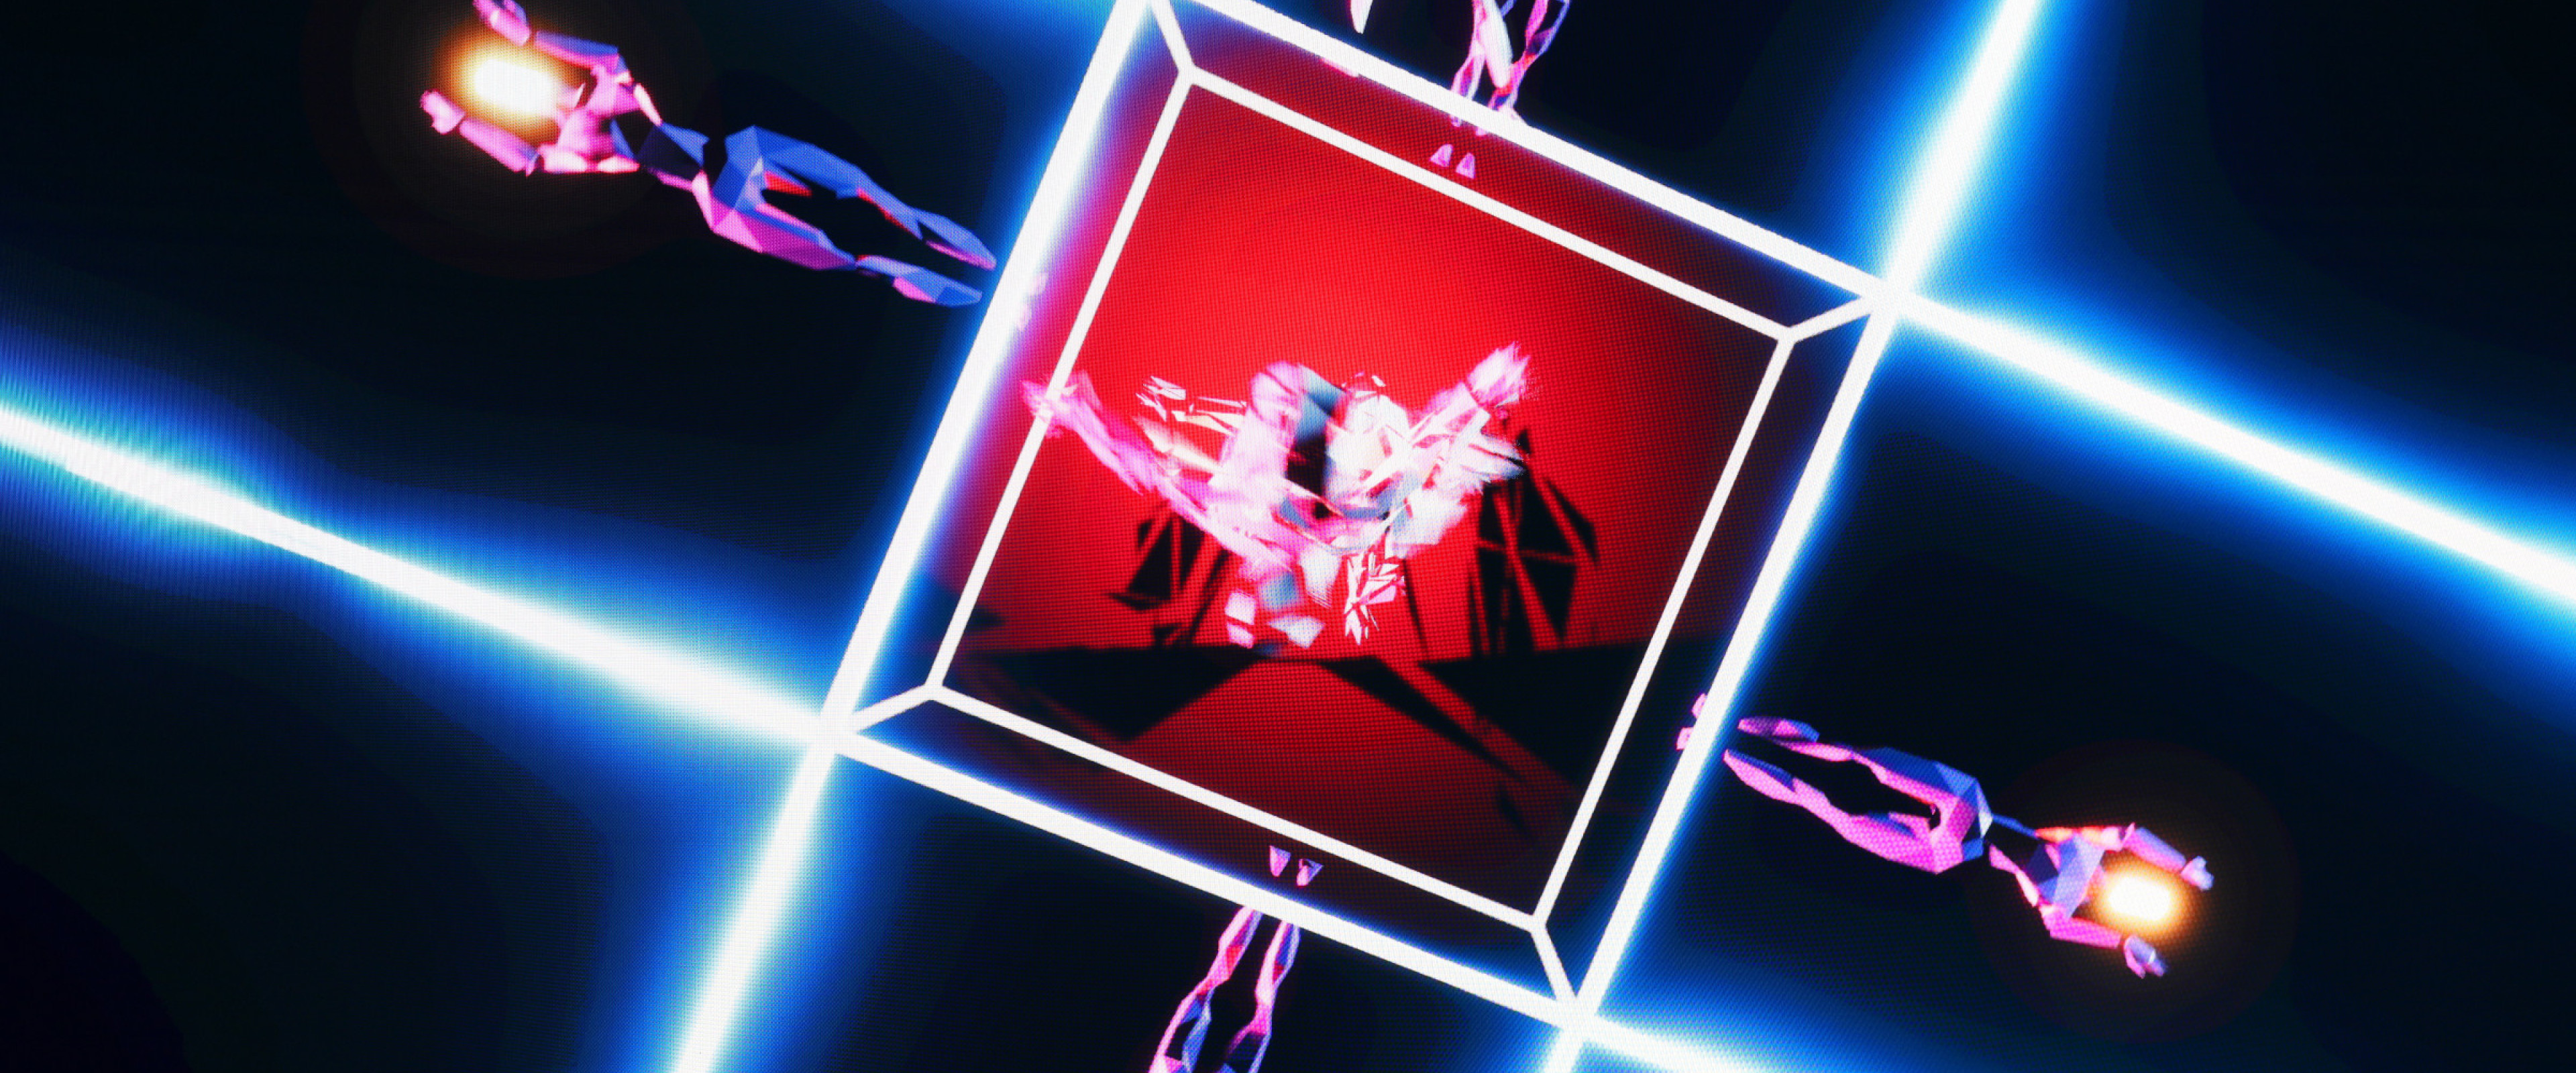 Still from Recode (screendance by Kelsey Paschich and Kevin Abbott) shown on LED wall. Five geometrically abstracted 3D avatars are configured on a glowing cube.